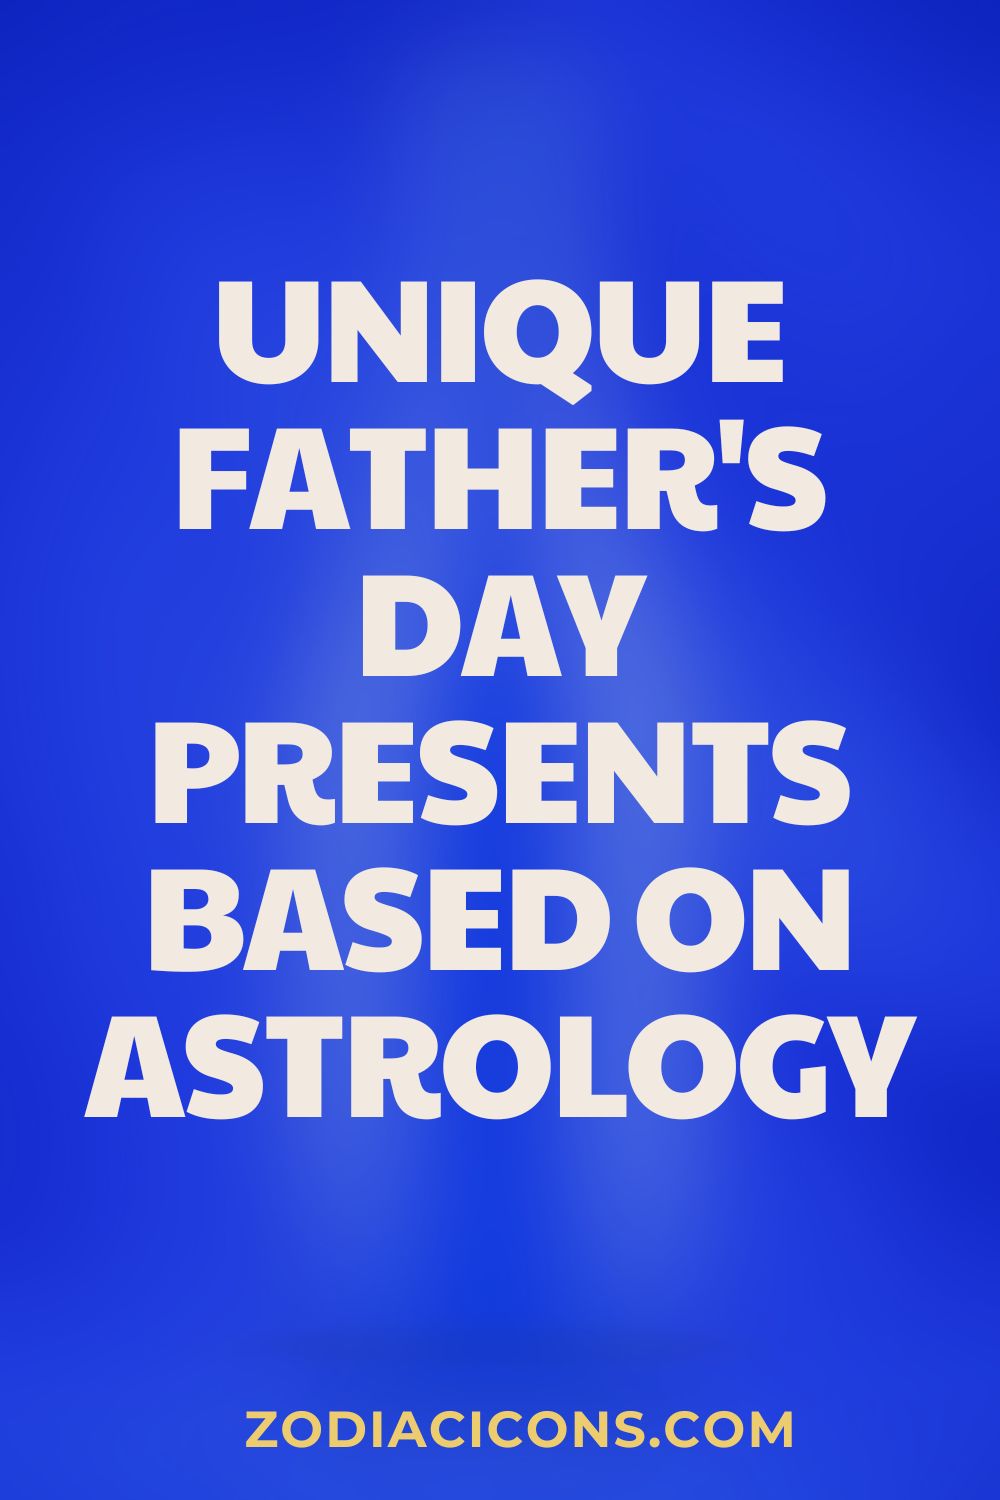 Unique Father's Day Presents Based on Astrology